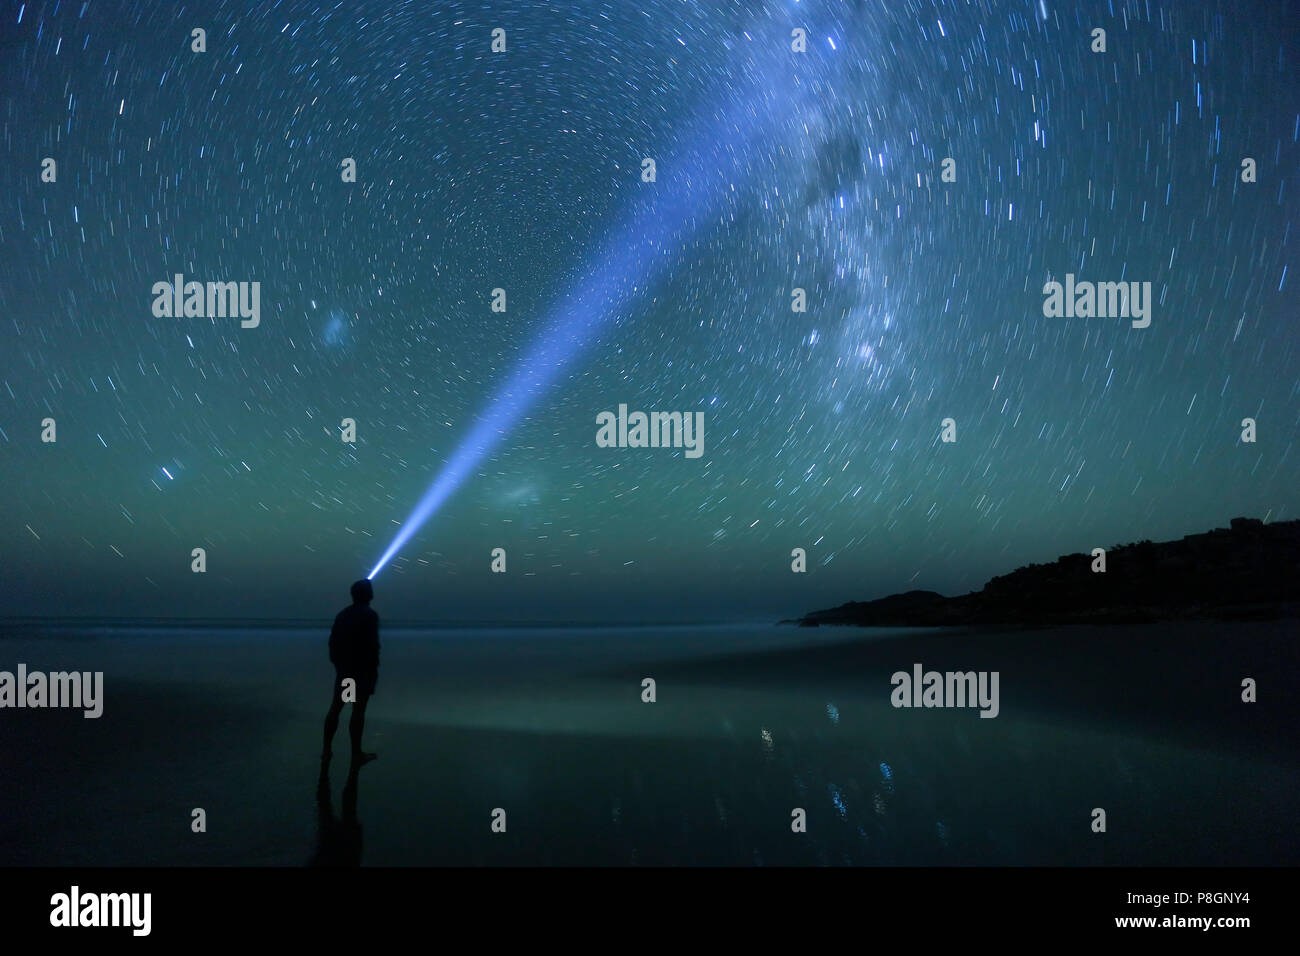 Man gazing at the bright night sky with thousands of beautiful stars. Stock Photo